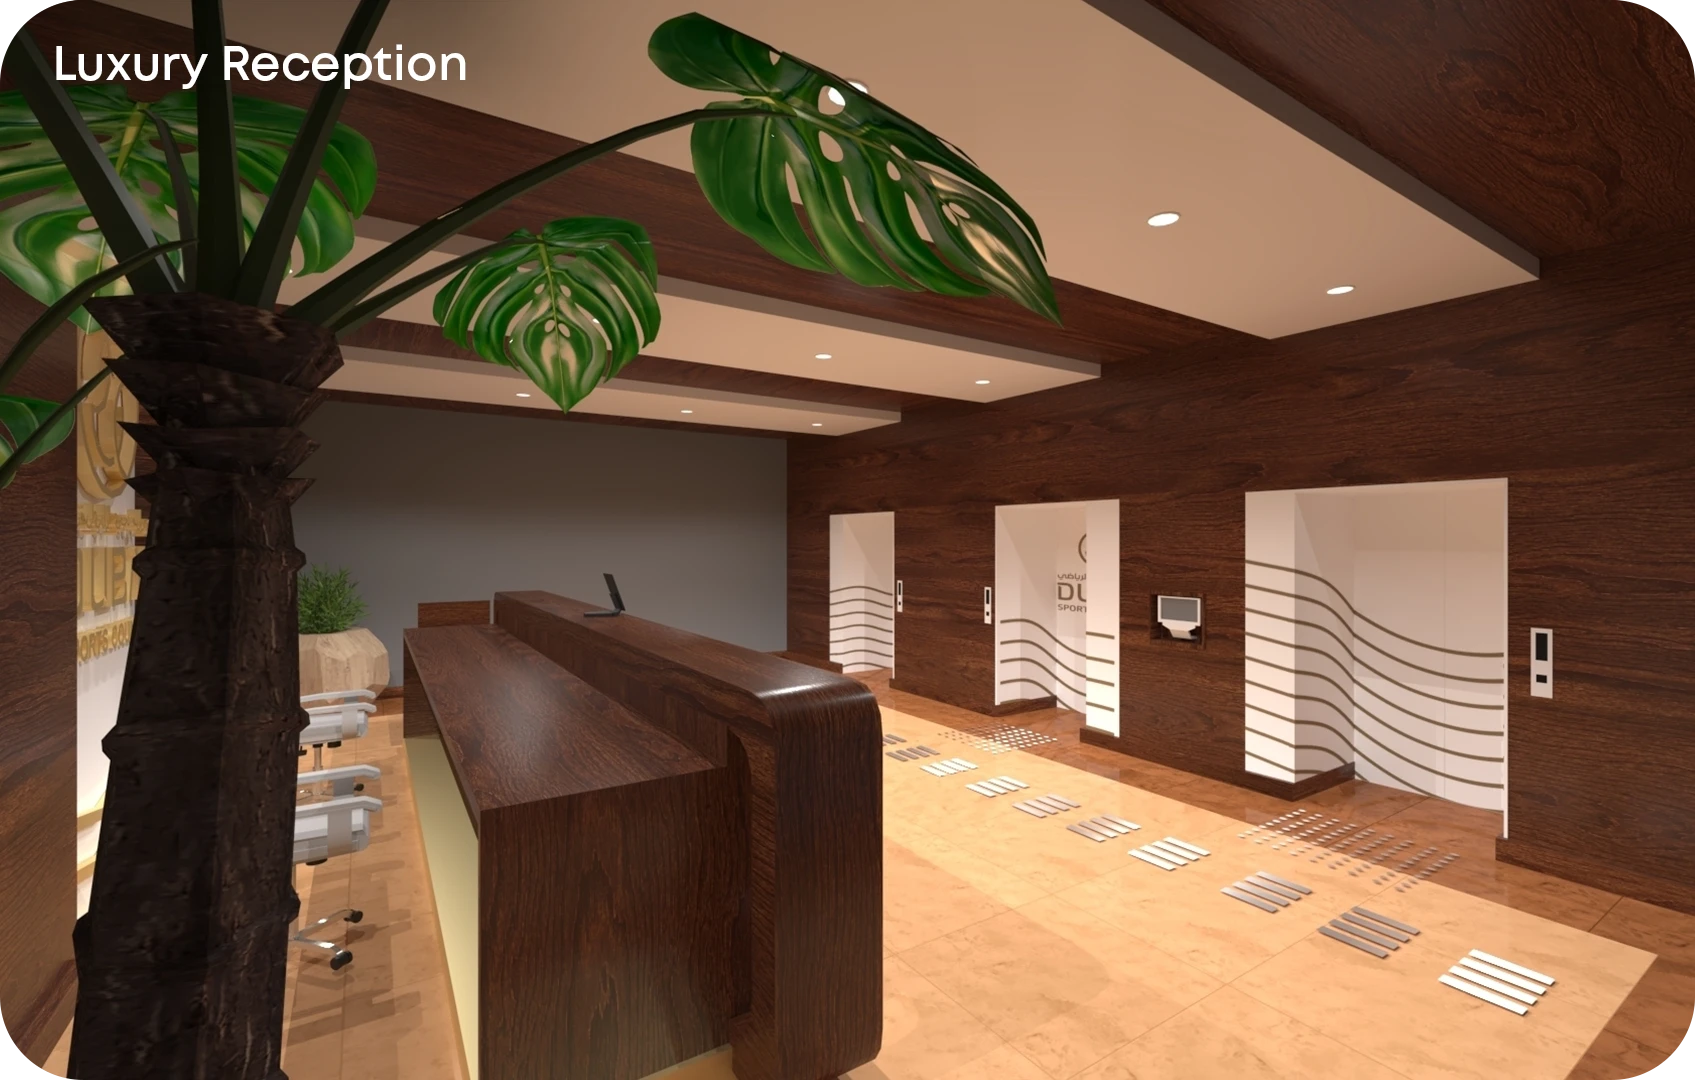 3679-luxury-reception-1.png